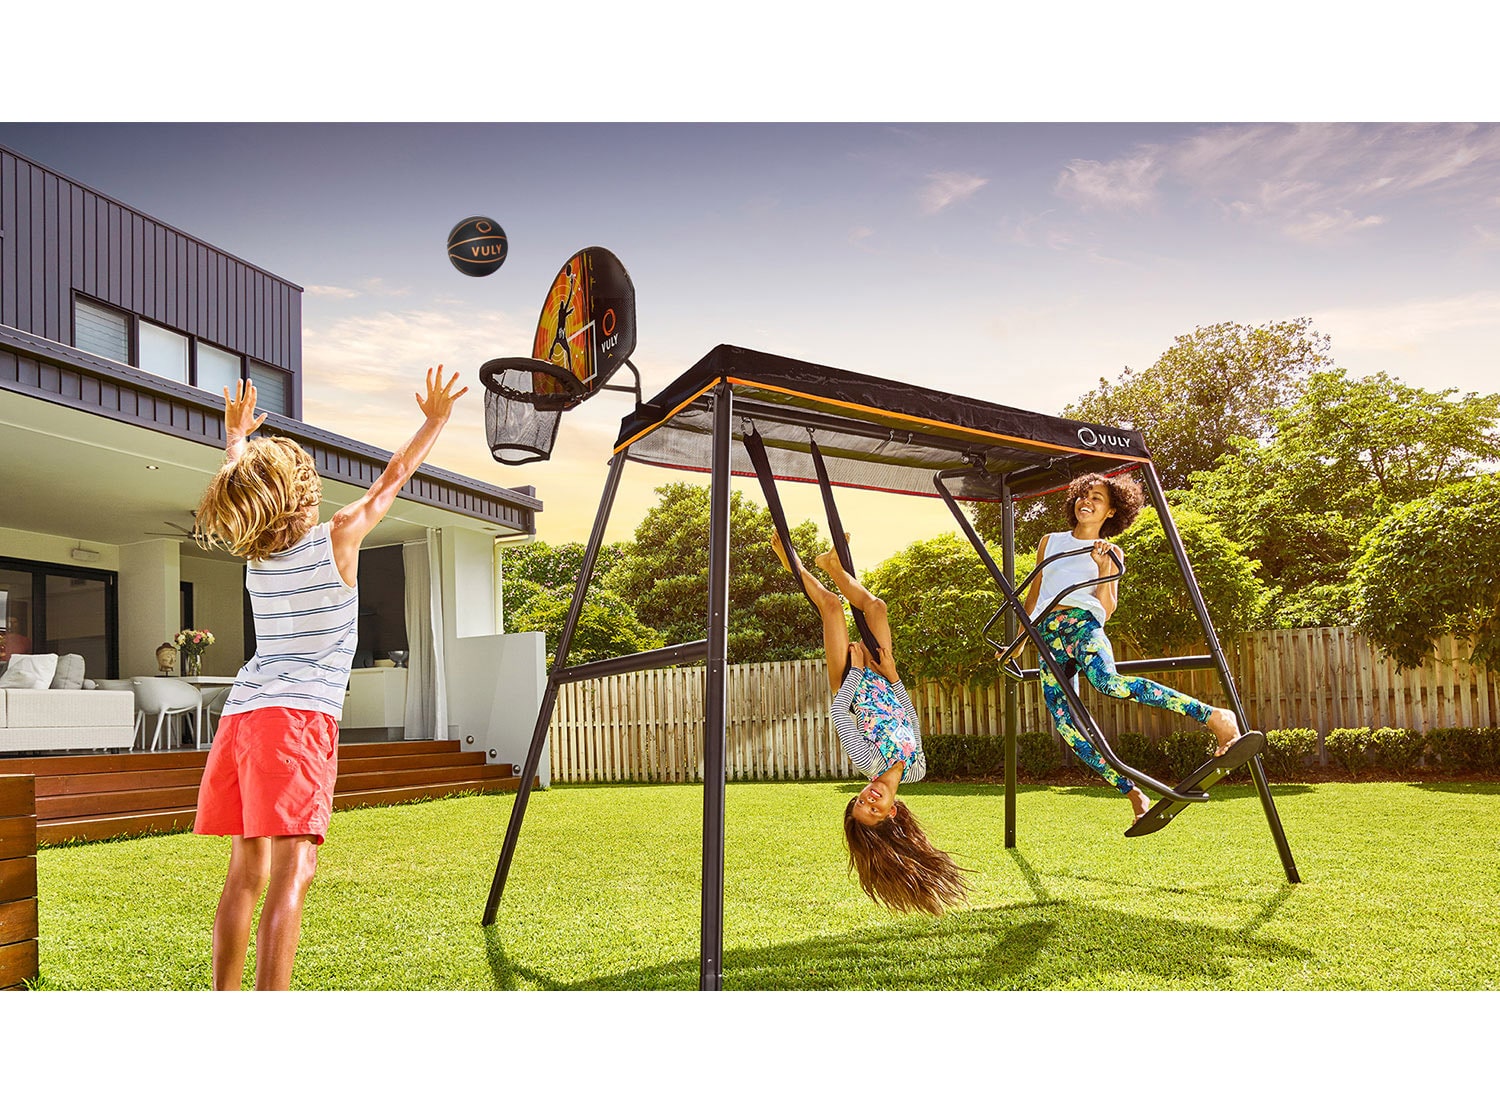 Attach a Basketball Set, Mister or Pulse to your 360 swing set, and enjoy them in a new way.